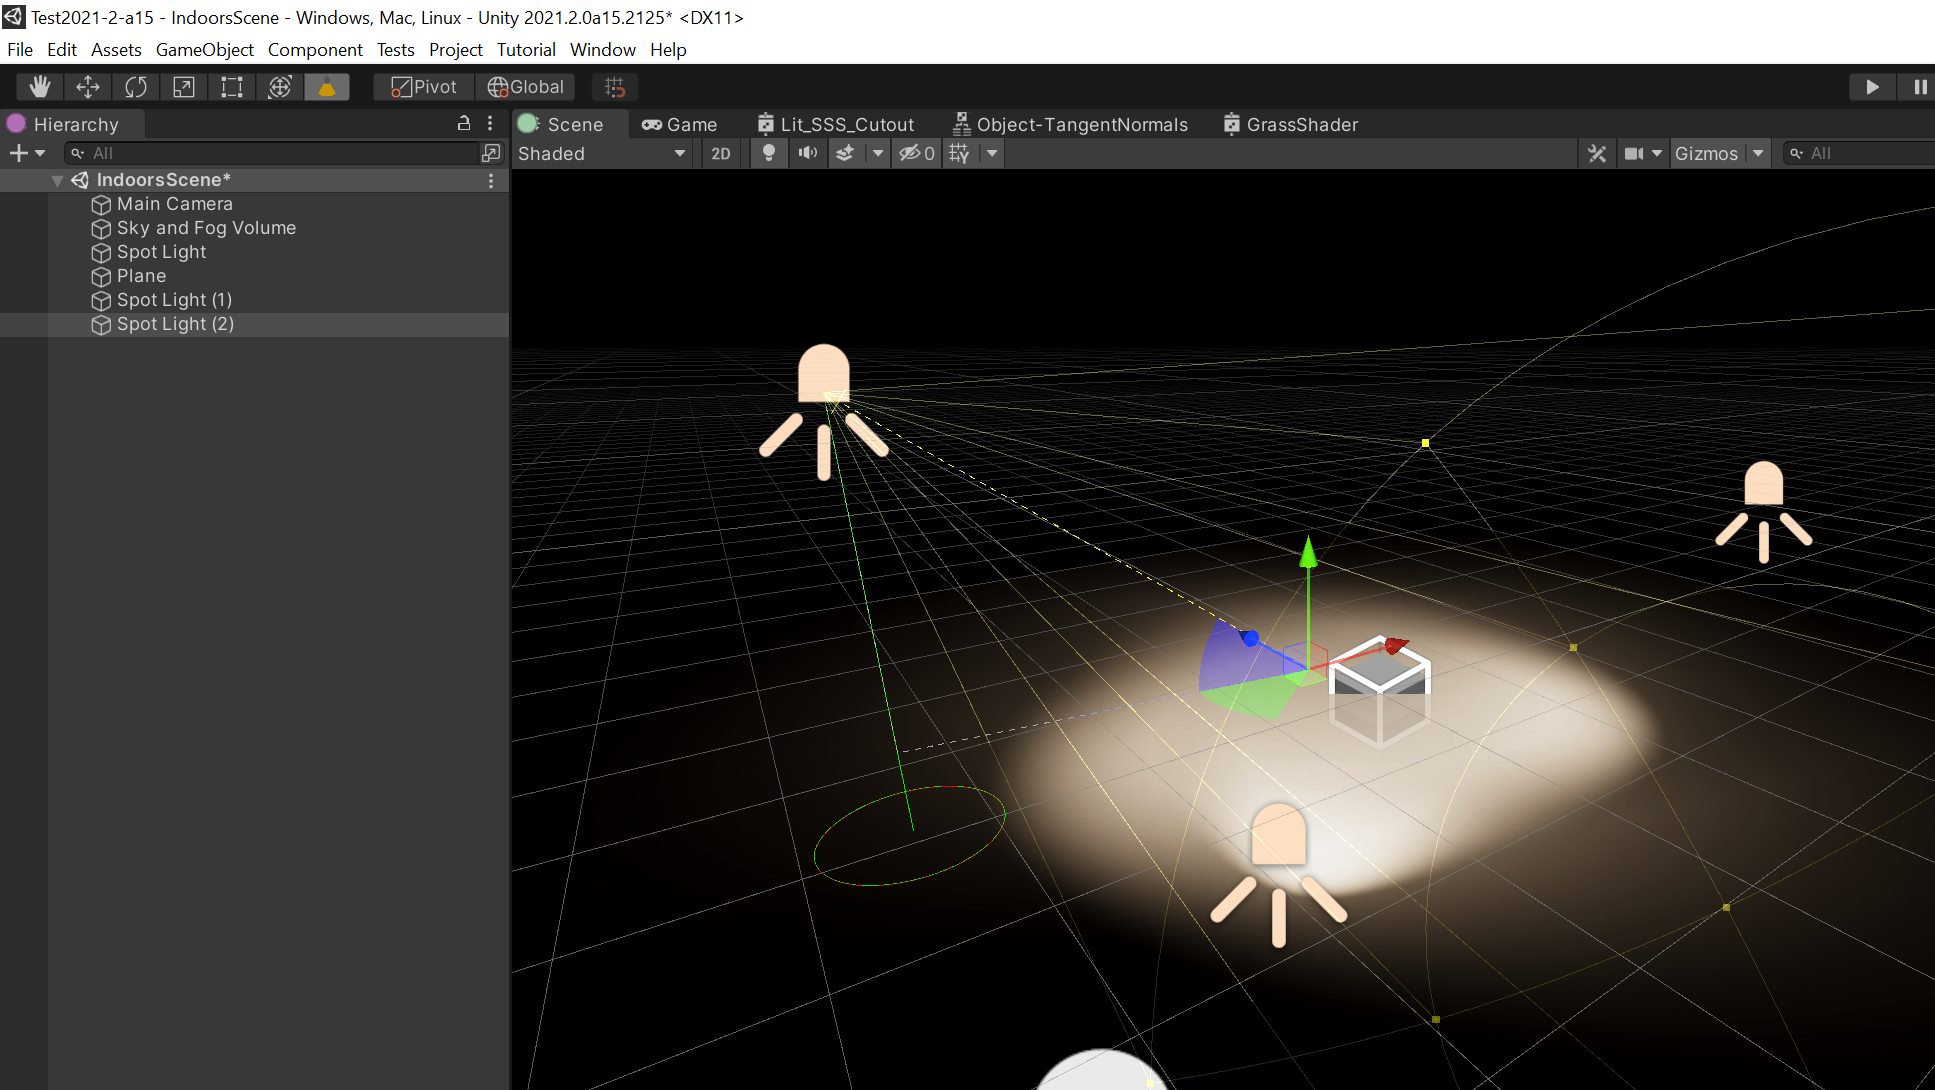 Lighting in the scene view of the Unity editor